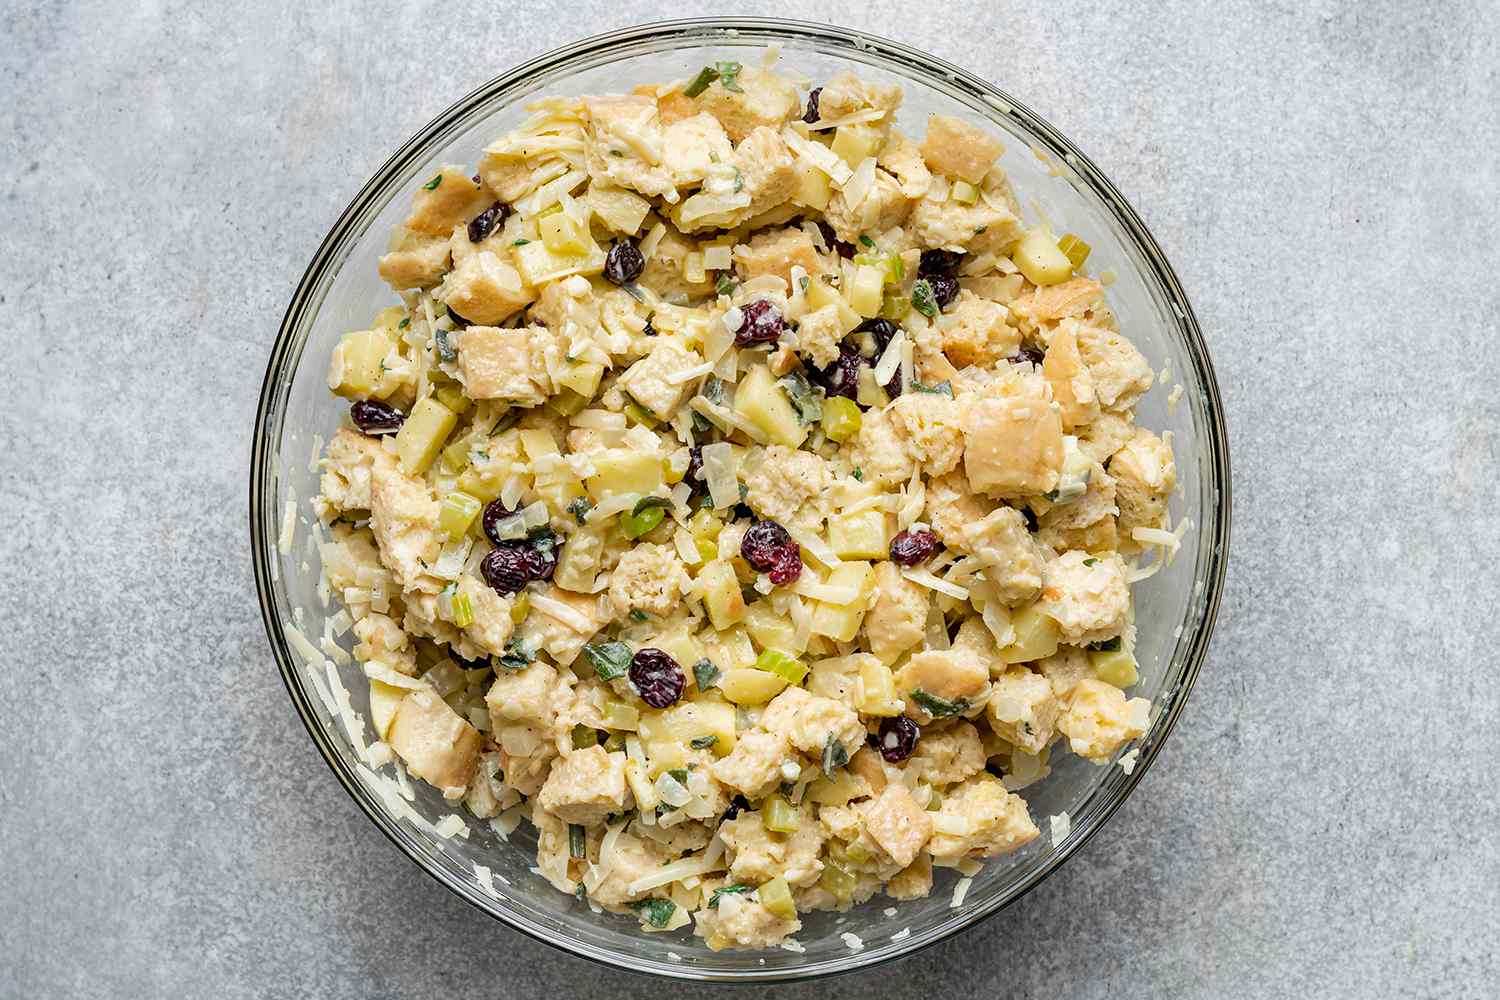 bread stuffing mixture with cranberries and cheese